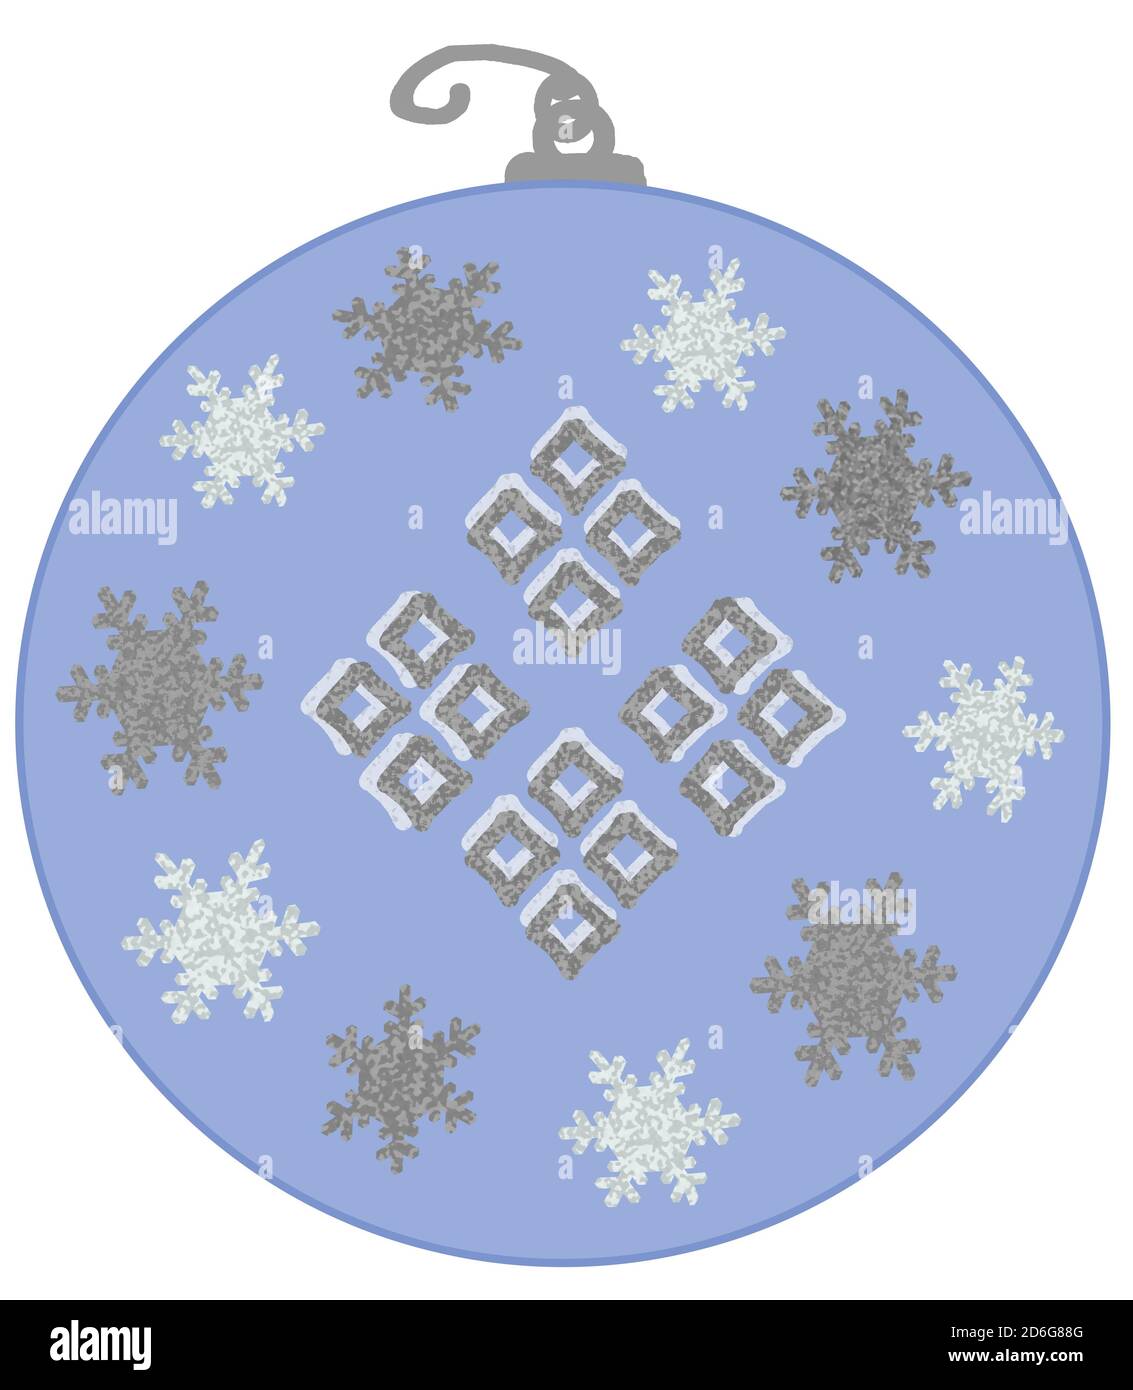 Blue holiday ornament with white and silver snowflakes and diamond shapes hand drawn style graphic resource. Stock Photo